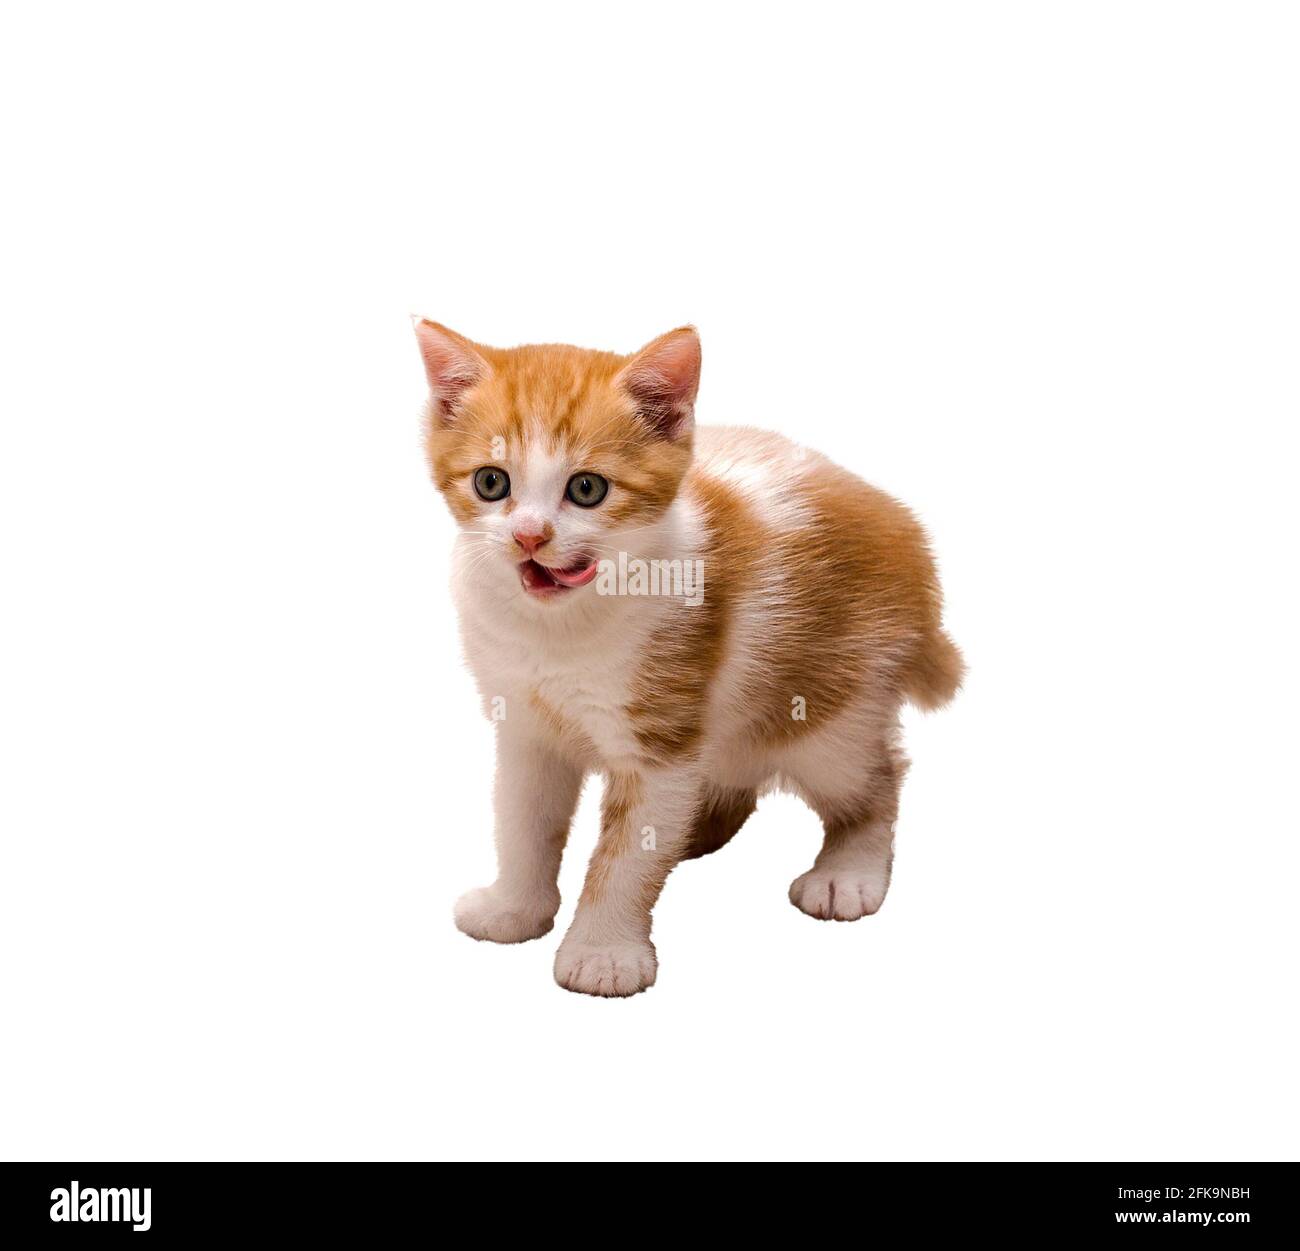 Cute little red kitten licking lips isolated on white background. Stock Photo